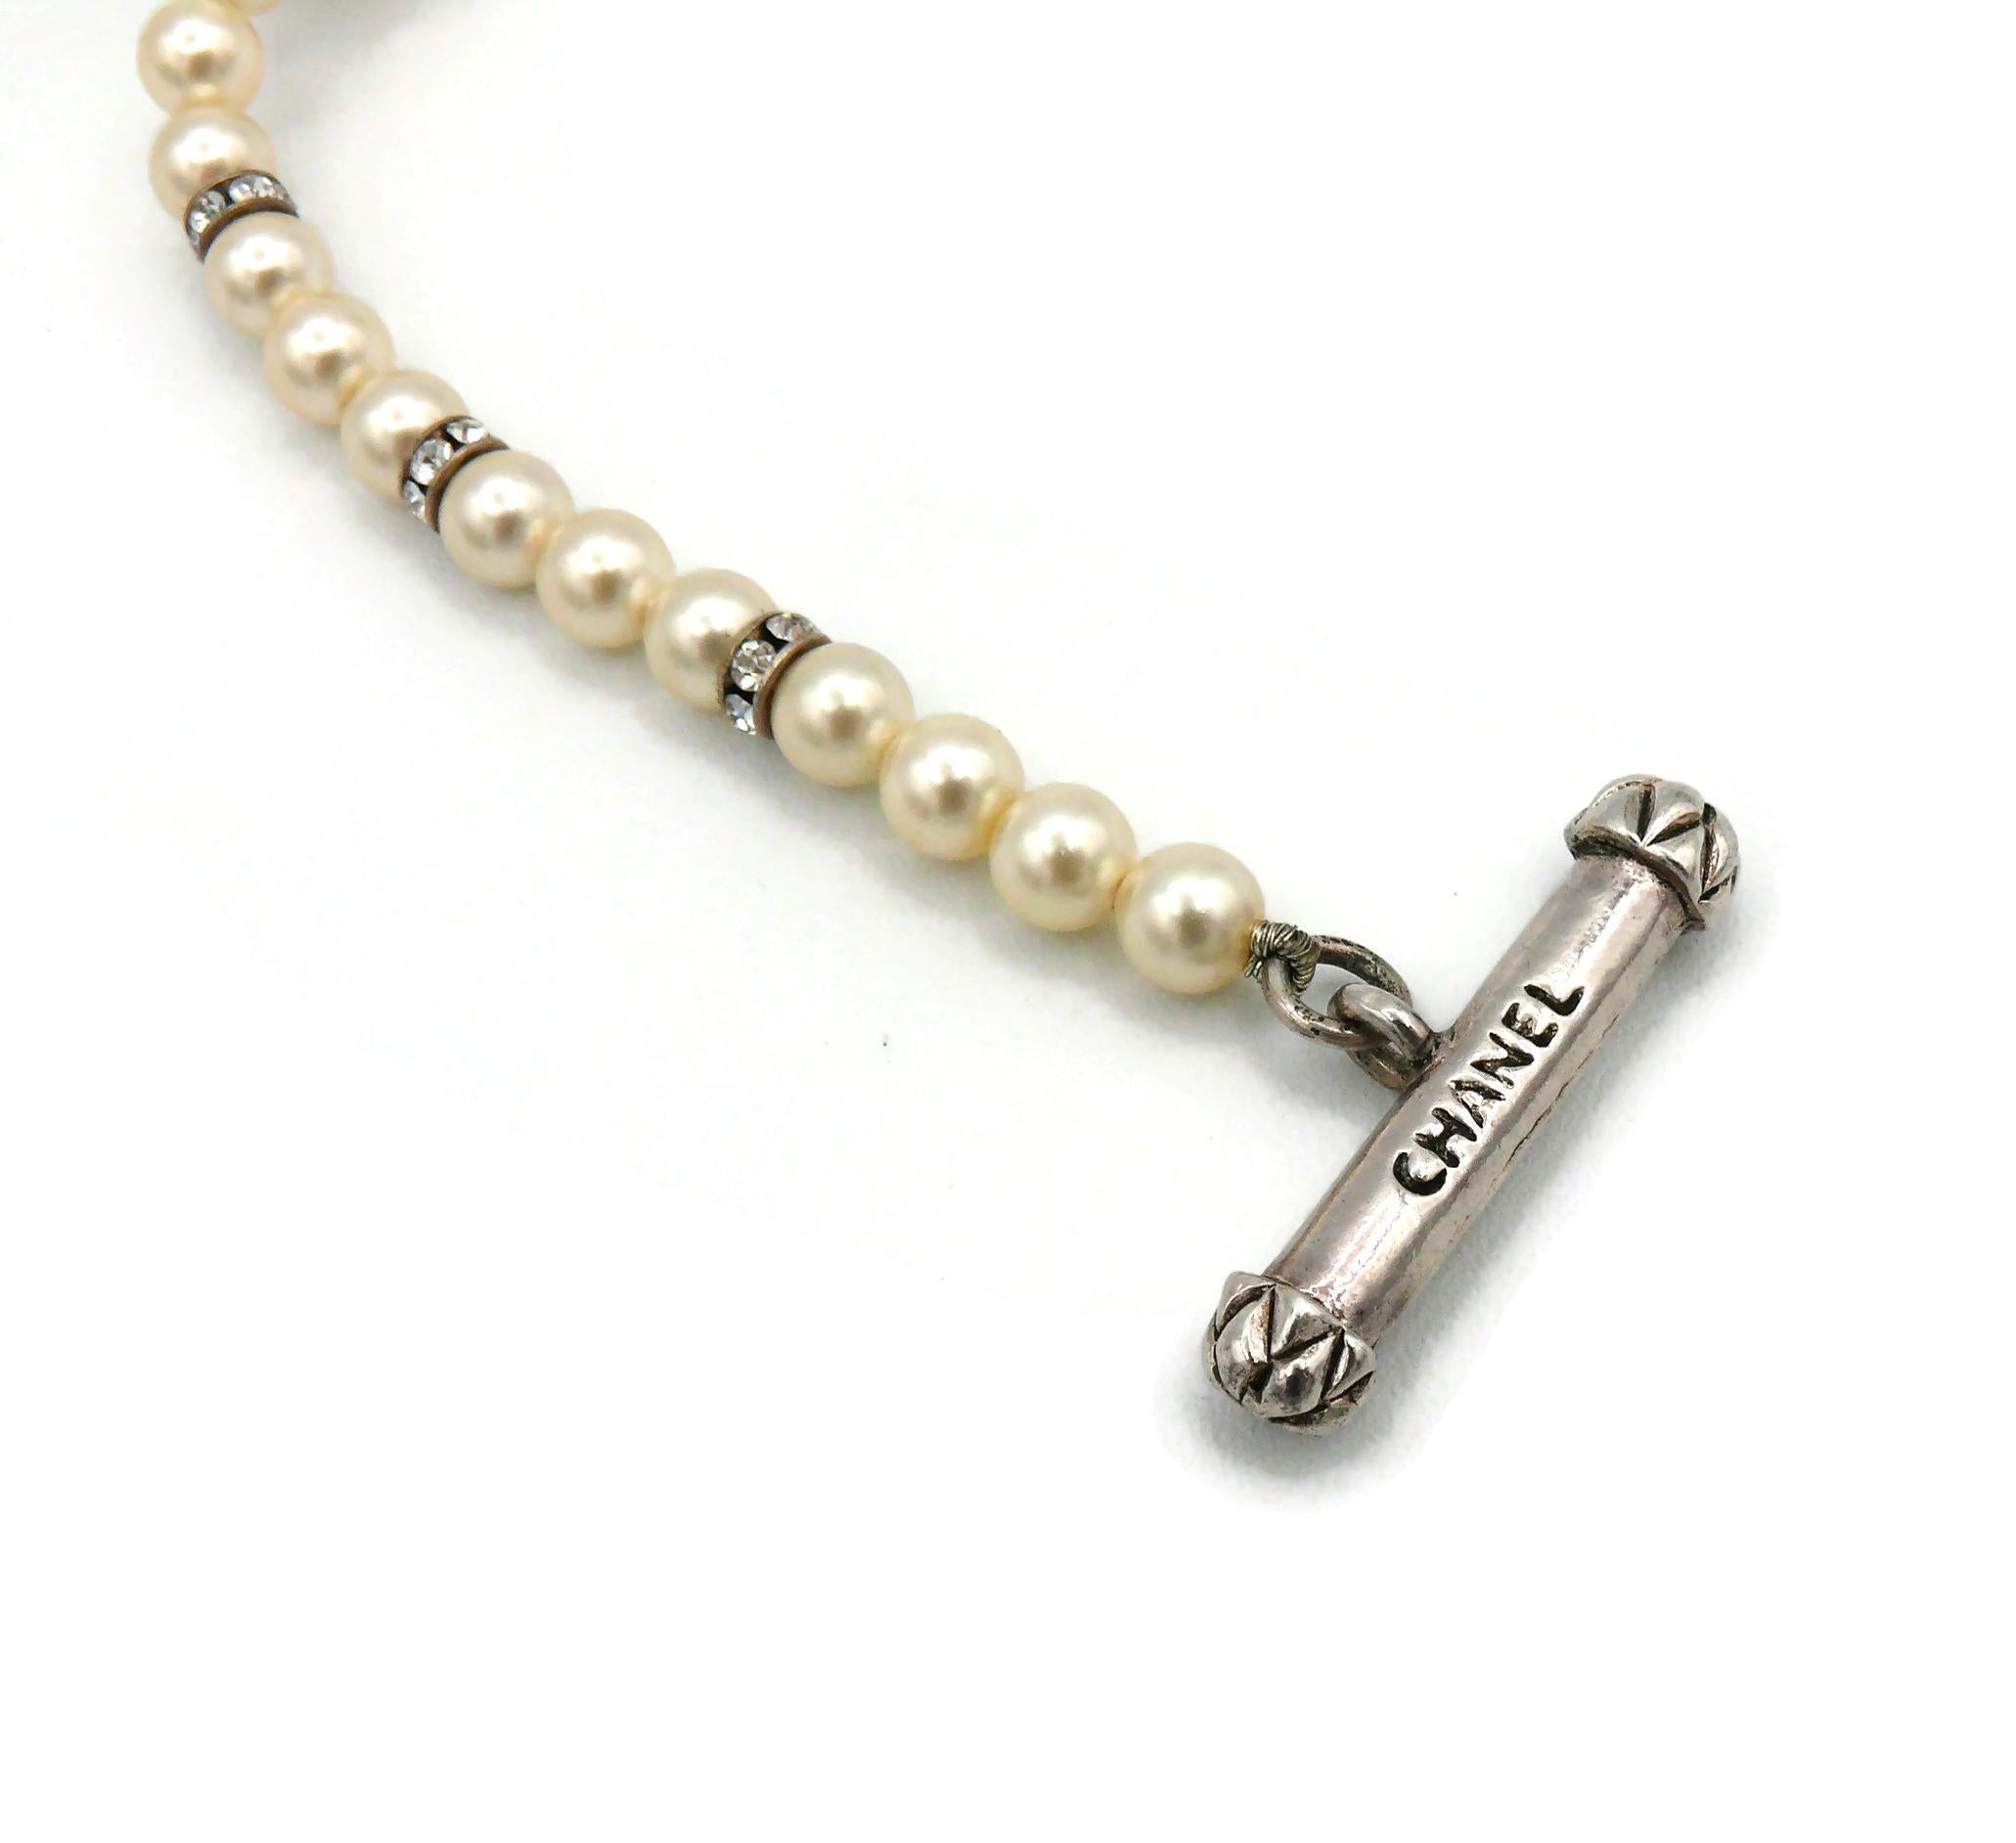 CHANEL by KARL LAGERFELD Vintage Faux Pearl and Crystal Necklace, Fall 1993 For Sale 9